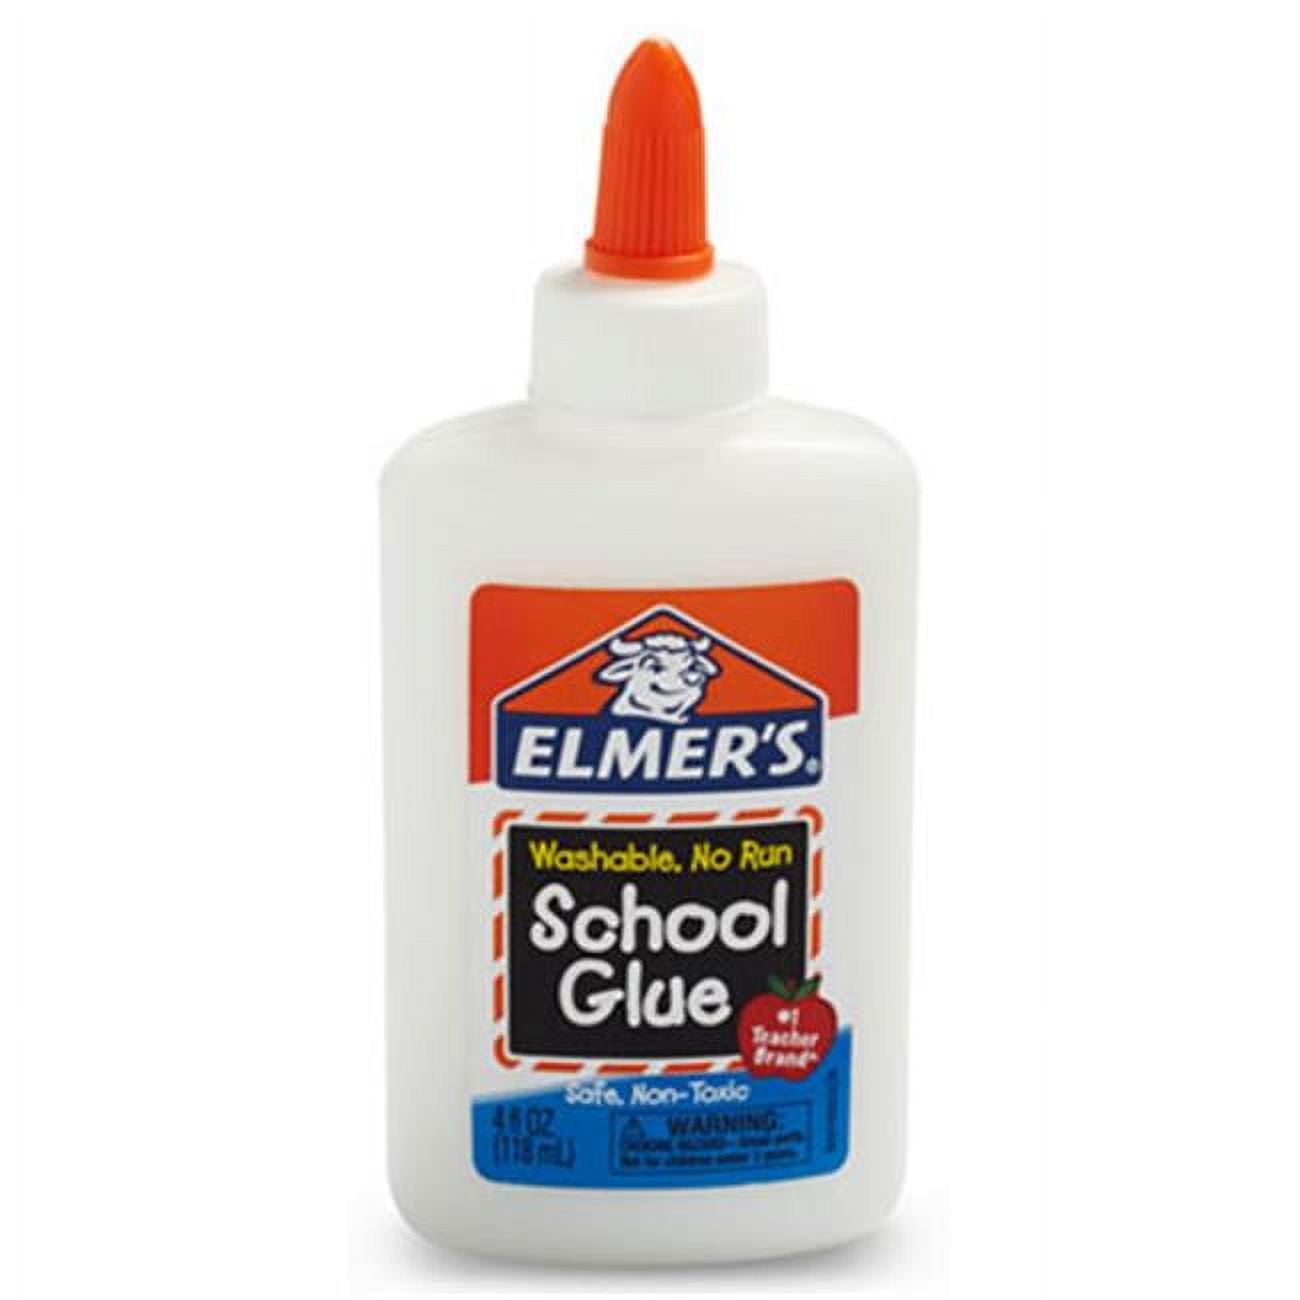 Pack of (12) Instant Krazy Glue All Purpose Tube 0.07-Ounce